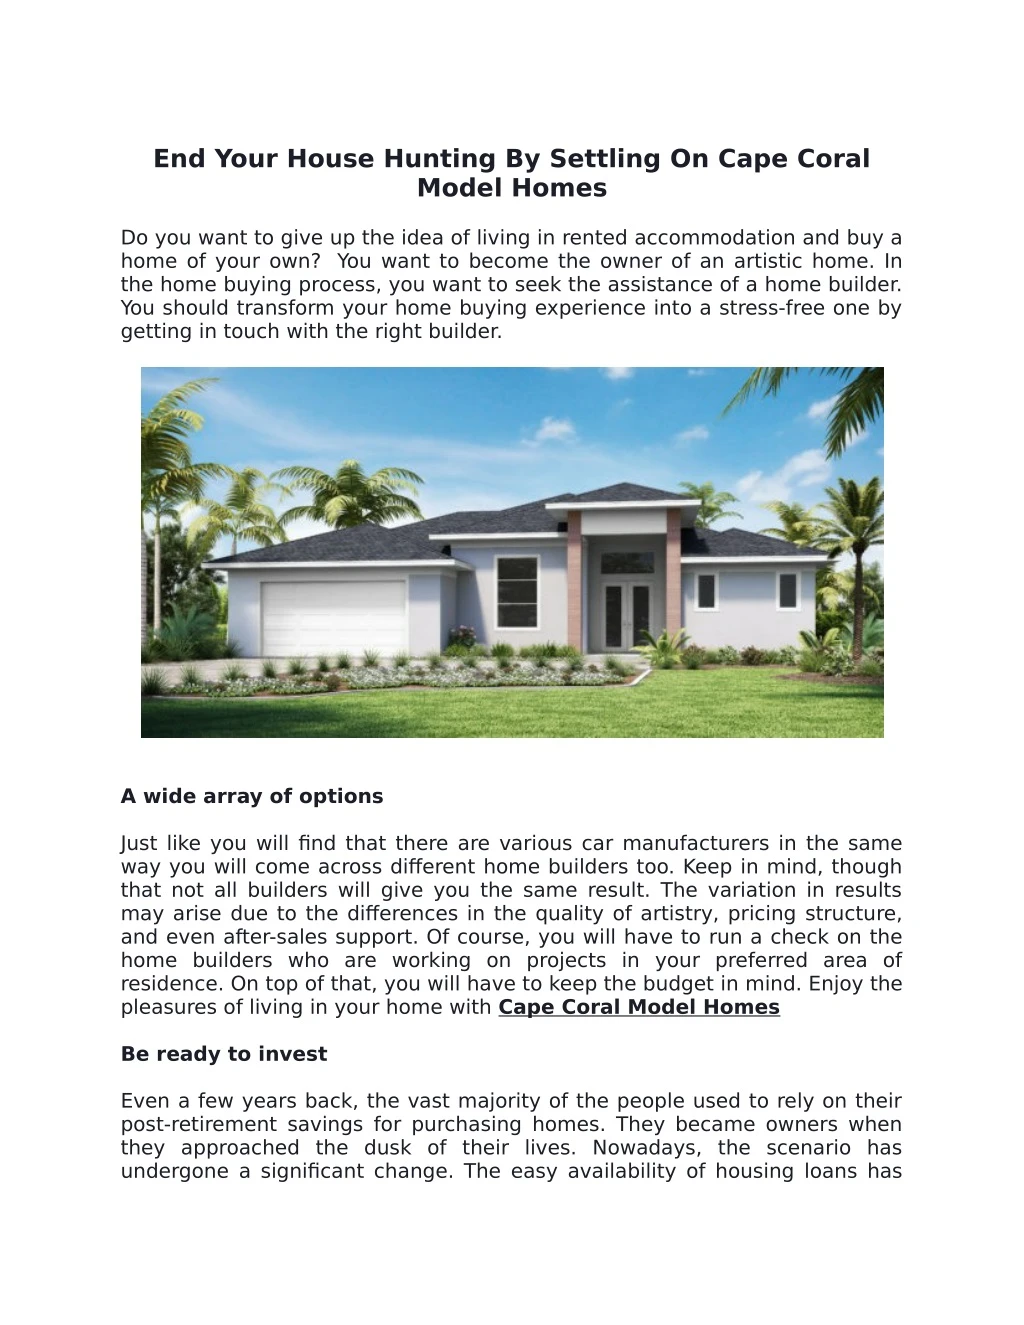 end your house hunting by settling on cape coral